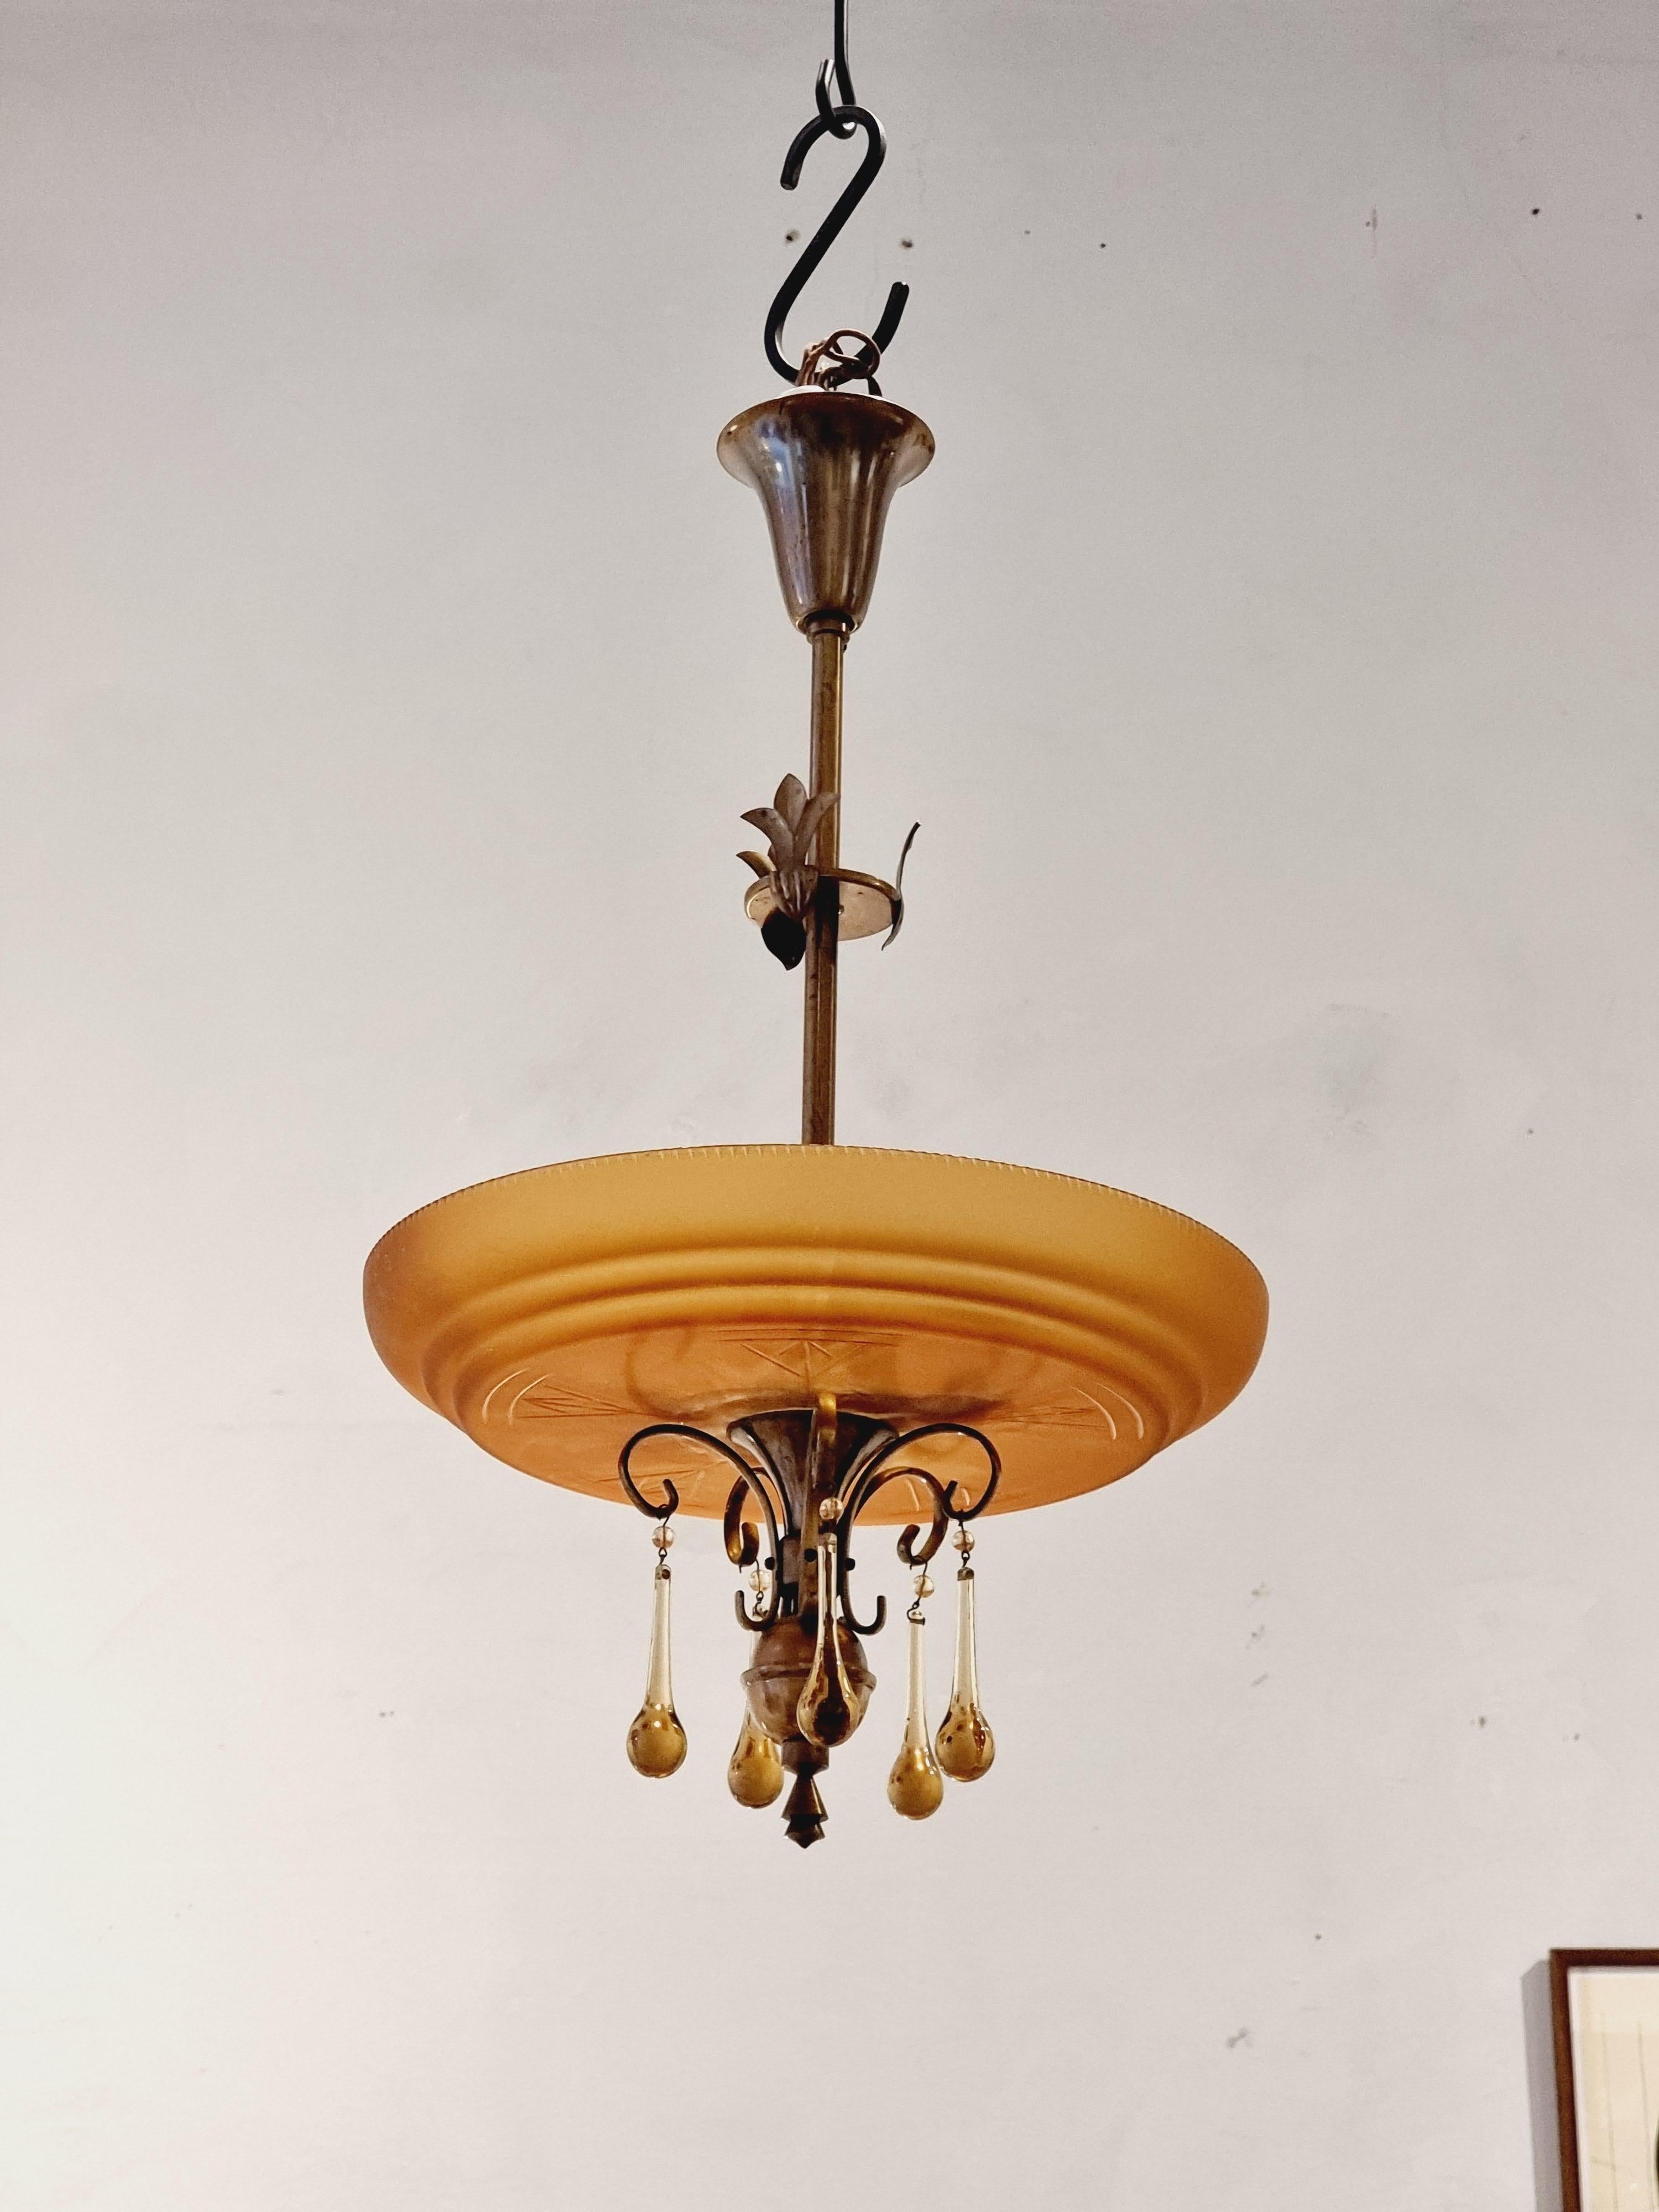 A beautiful, delicate ceiling light attributed to the glassmaster Simon Gate, and designer Harald Notini for Böhlmark. Glass attributed to Orrefors, also inte the manner of Pukeberg, Sweden. Both Notini and Gate are known for their beautiful quality